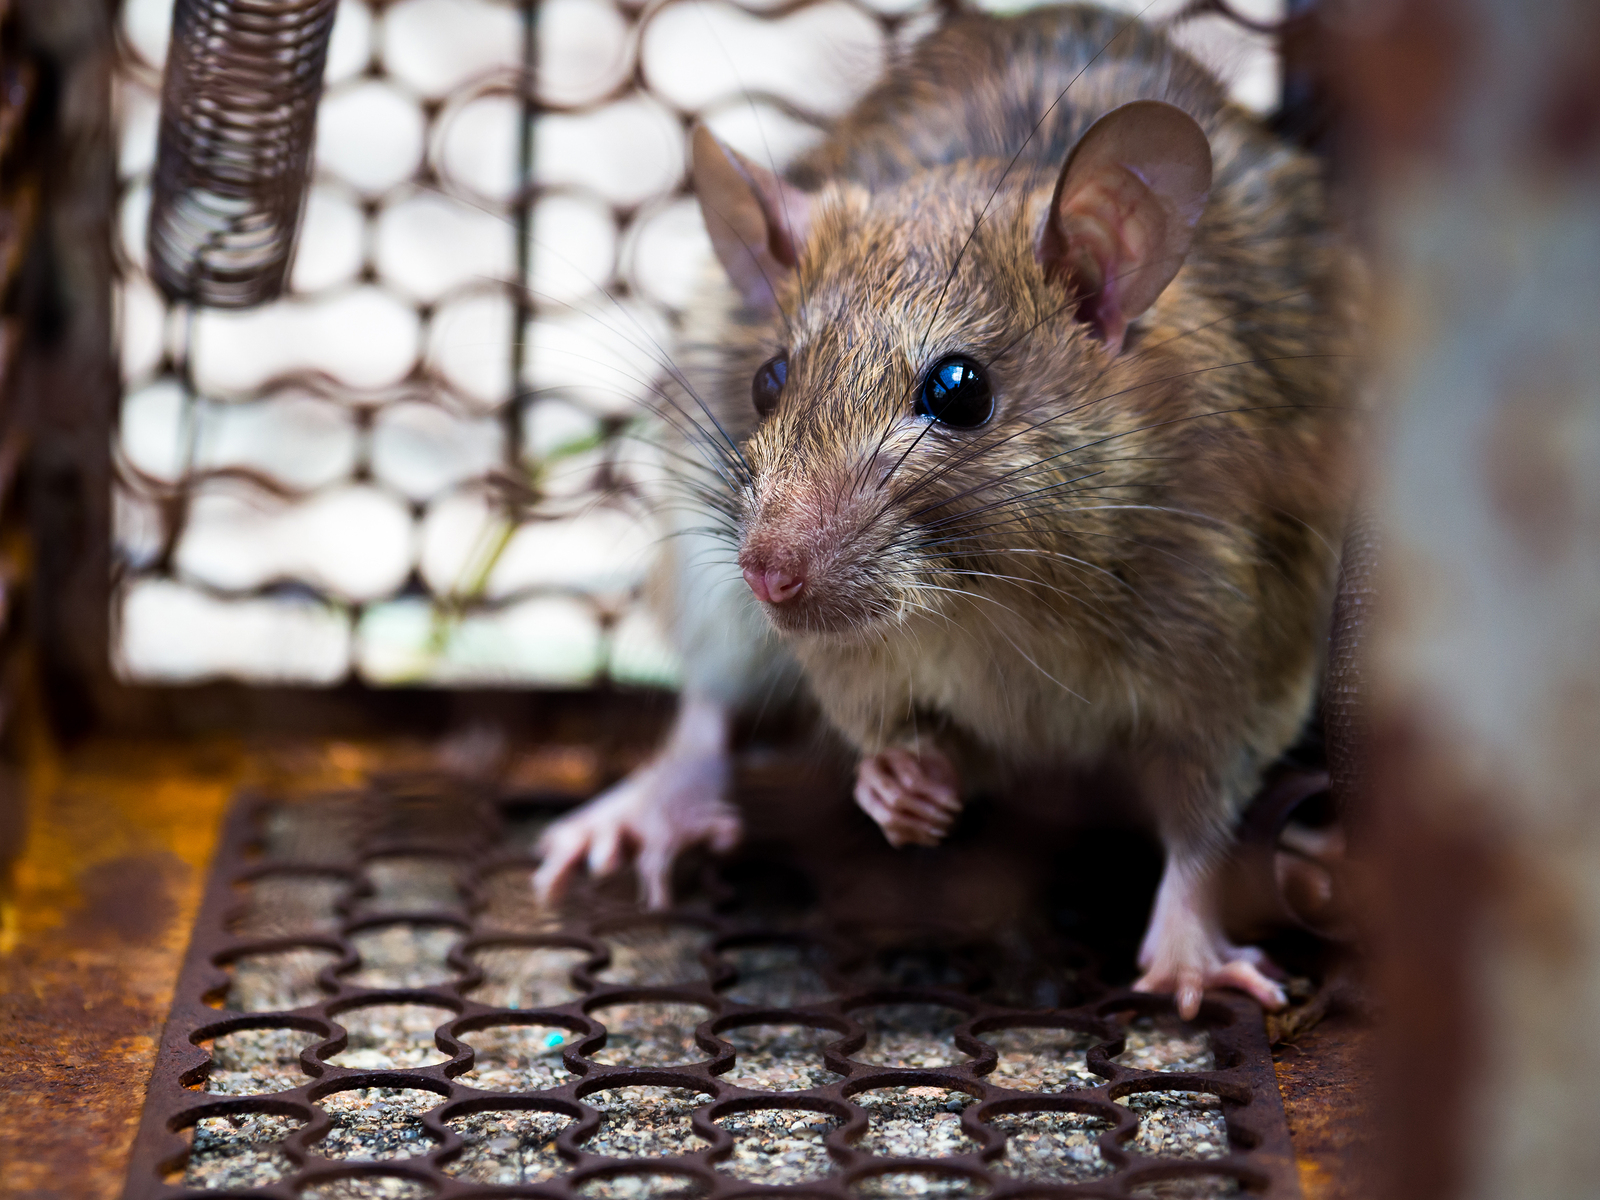 bigstock-The-Rat-Was-In-A-Cage-Catching